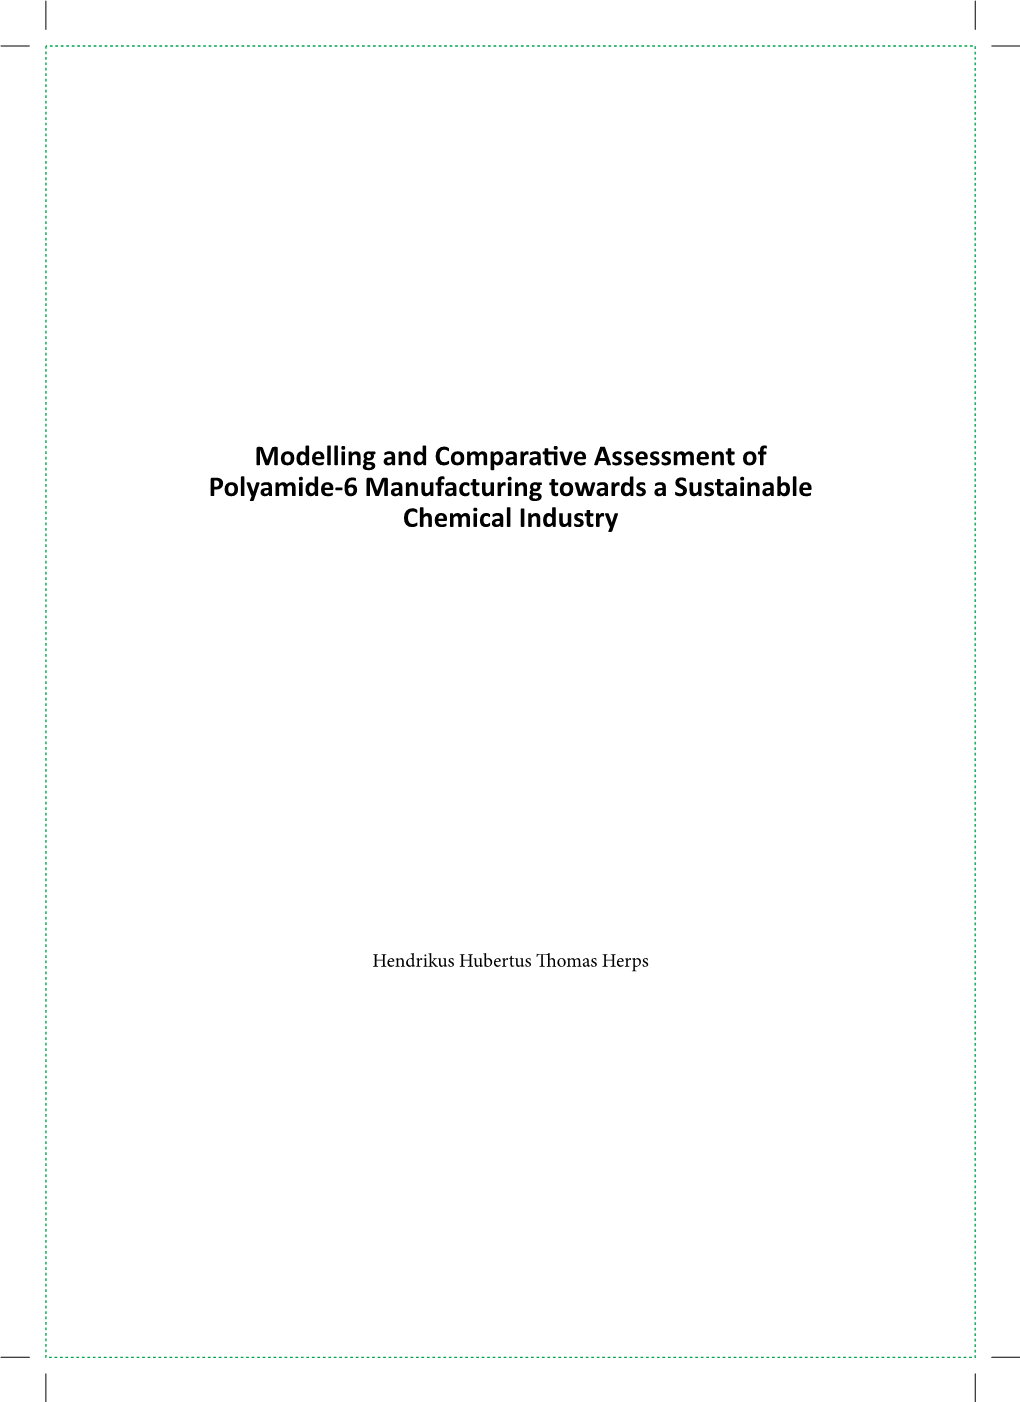 Modelling and Comparative Assessment of Polyamide-6 Manufacturing Towards a Sustainable Chemical Industry